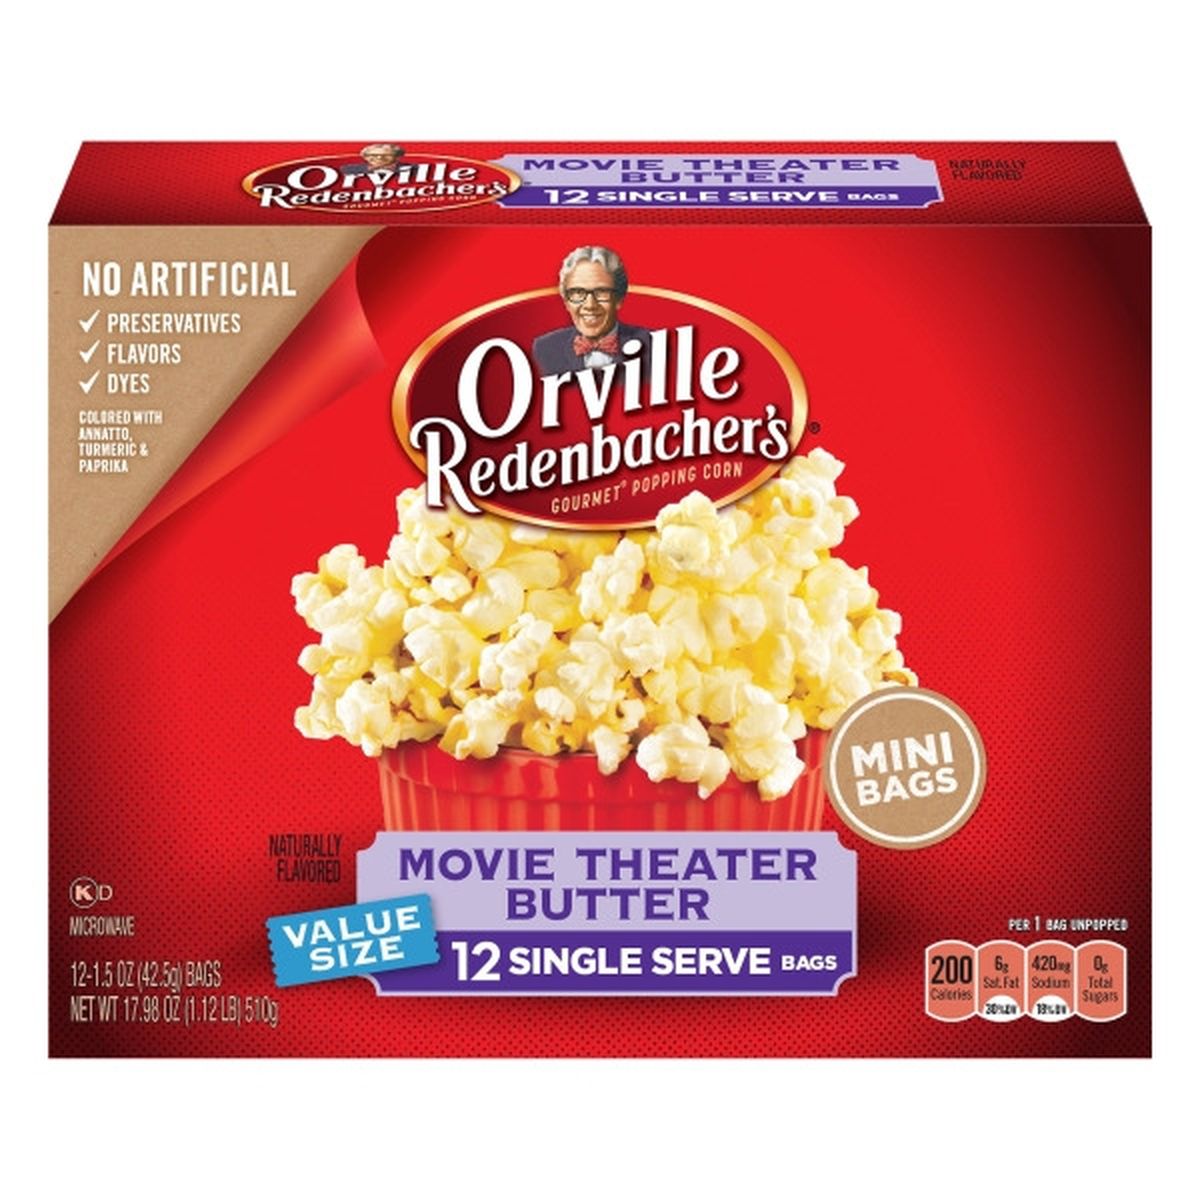 Calories in Orville Redenbacher's Popping Corn, Movie Theater Butter, Mini, Value Size, 12 Single Serve Bags